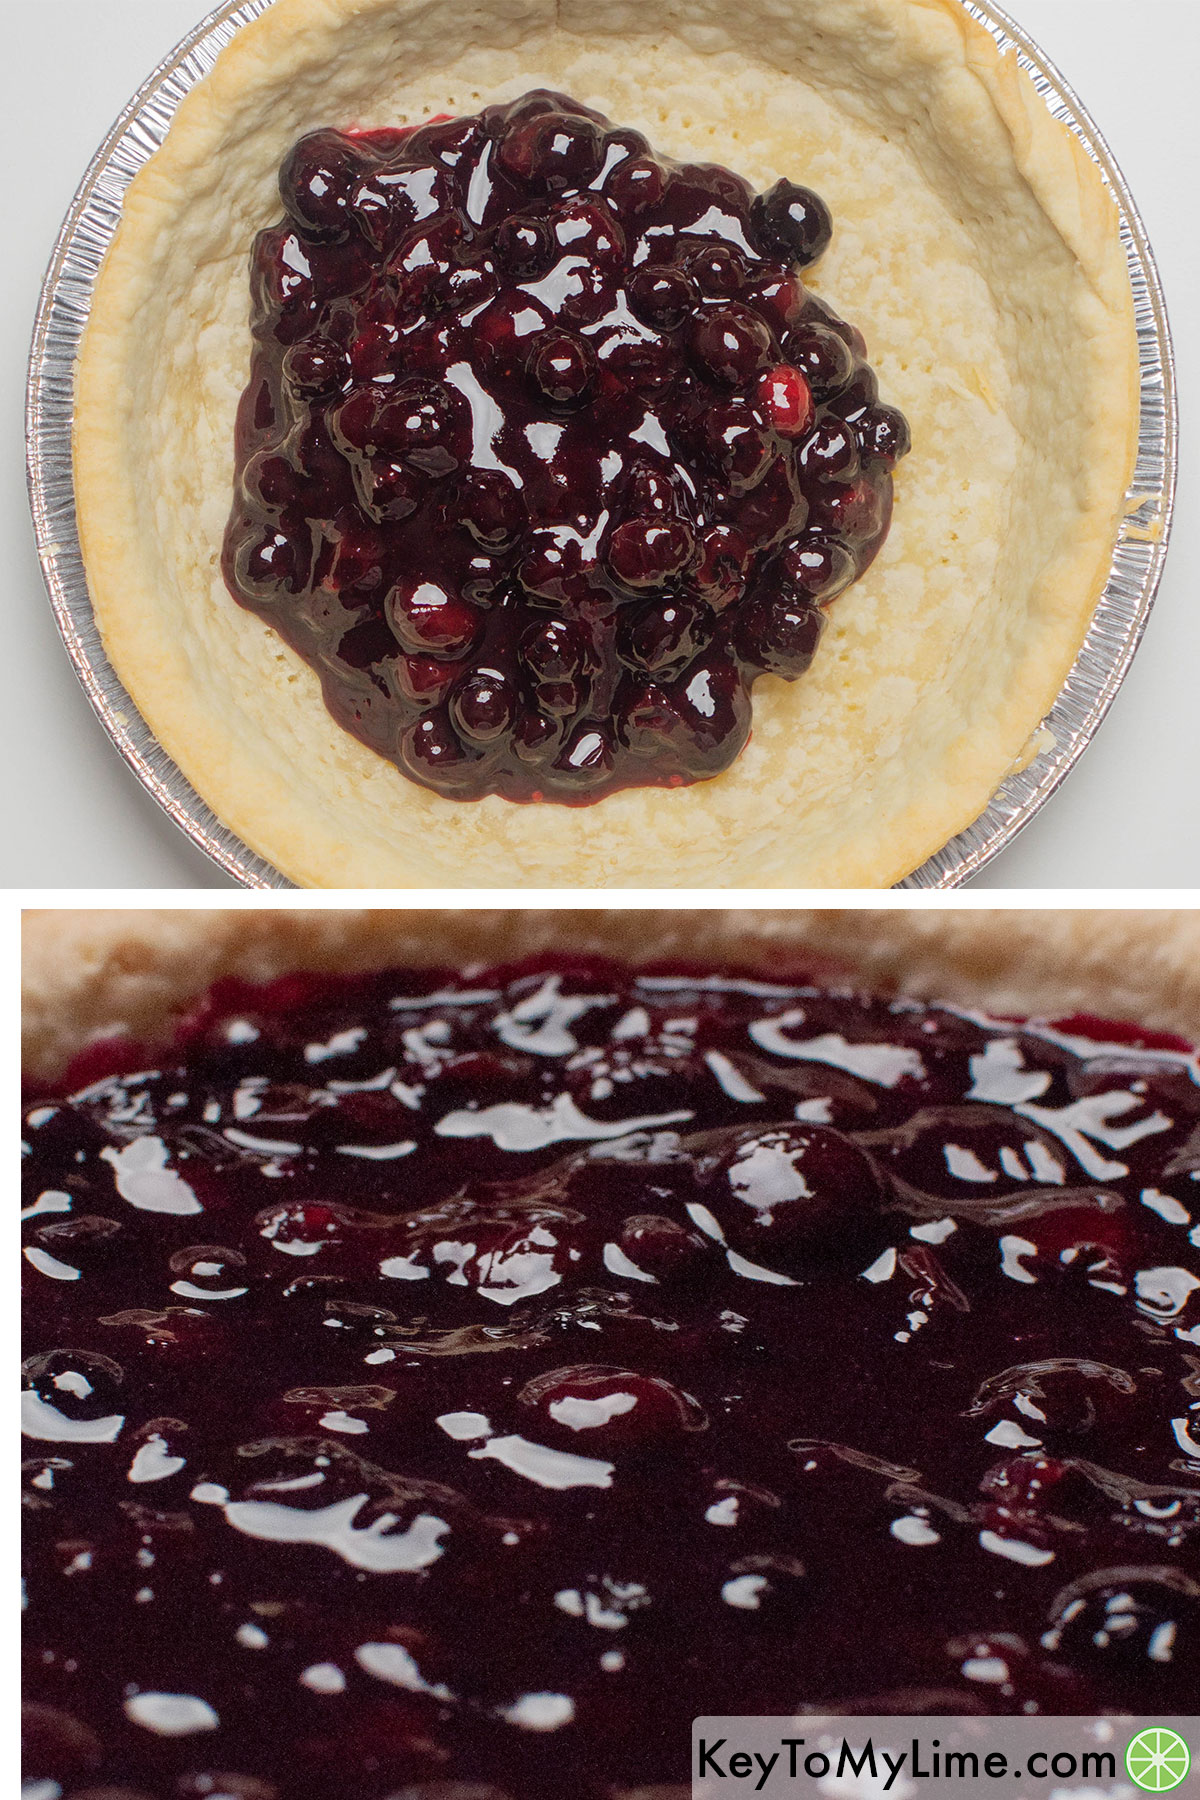 Pouring the blueberry pie filling into a pie crust.